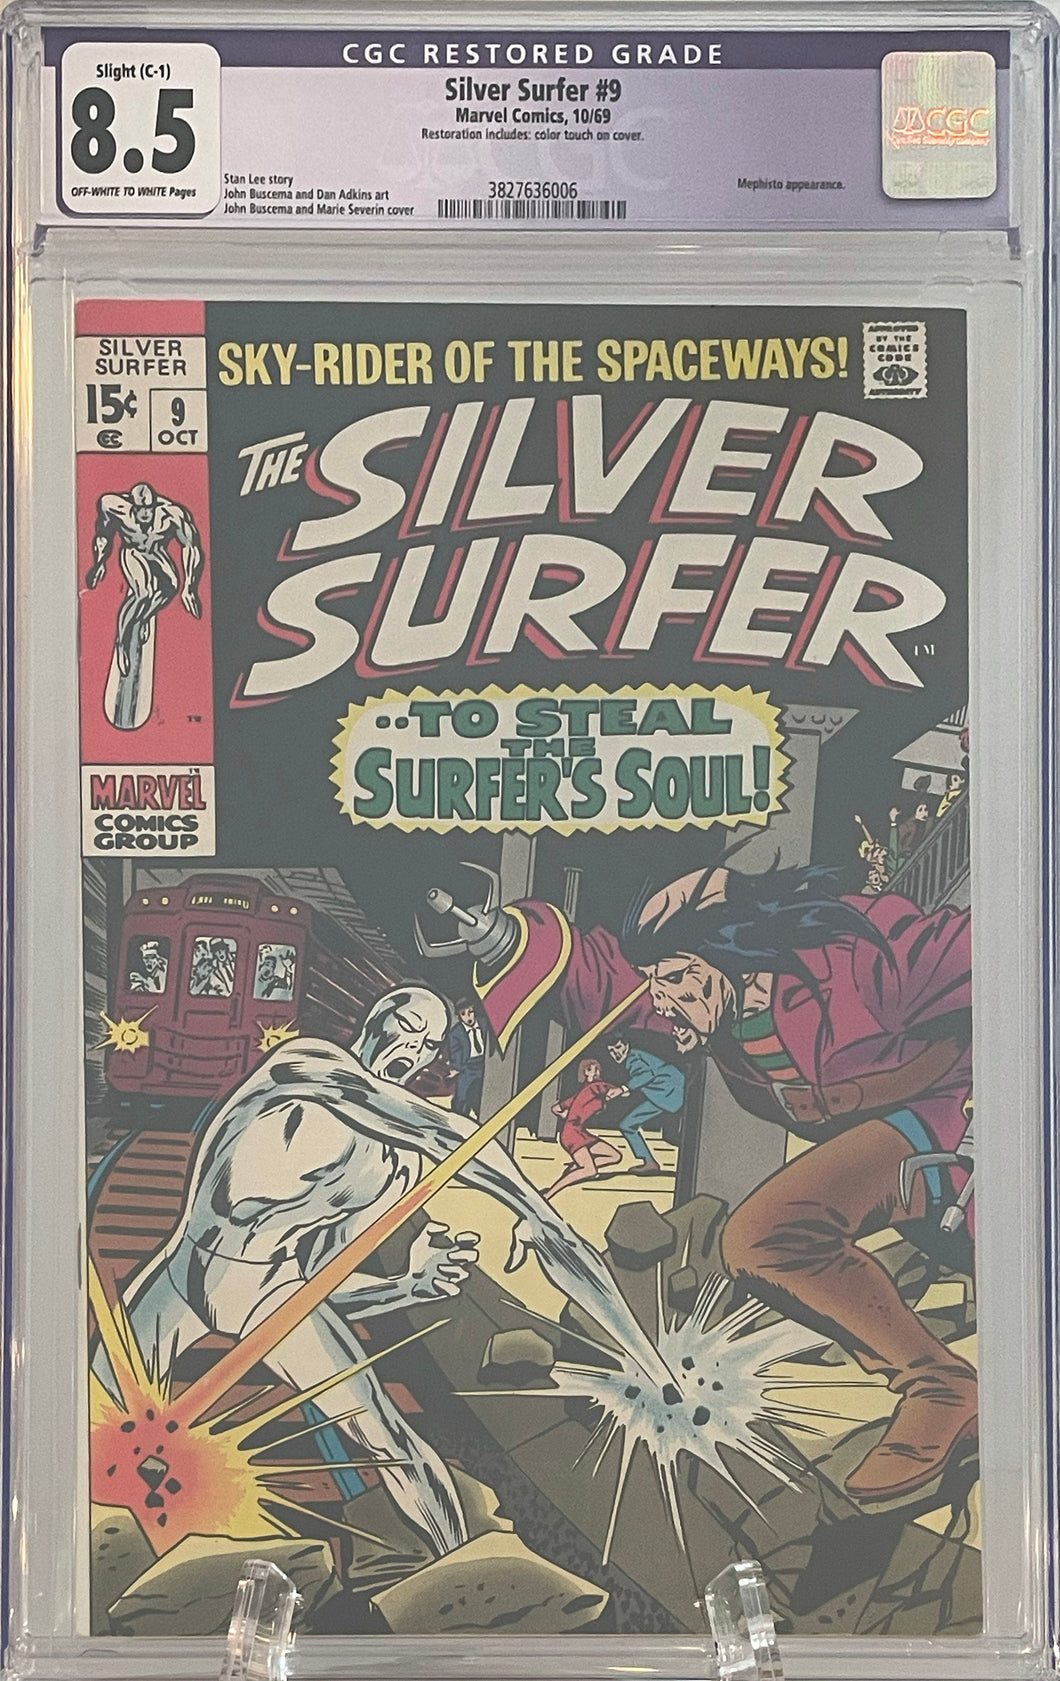 The Silver Surfer #9 CGC QUALIFIED 8.5